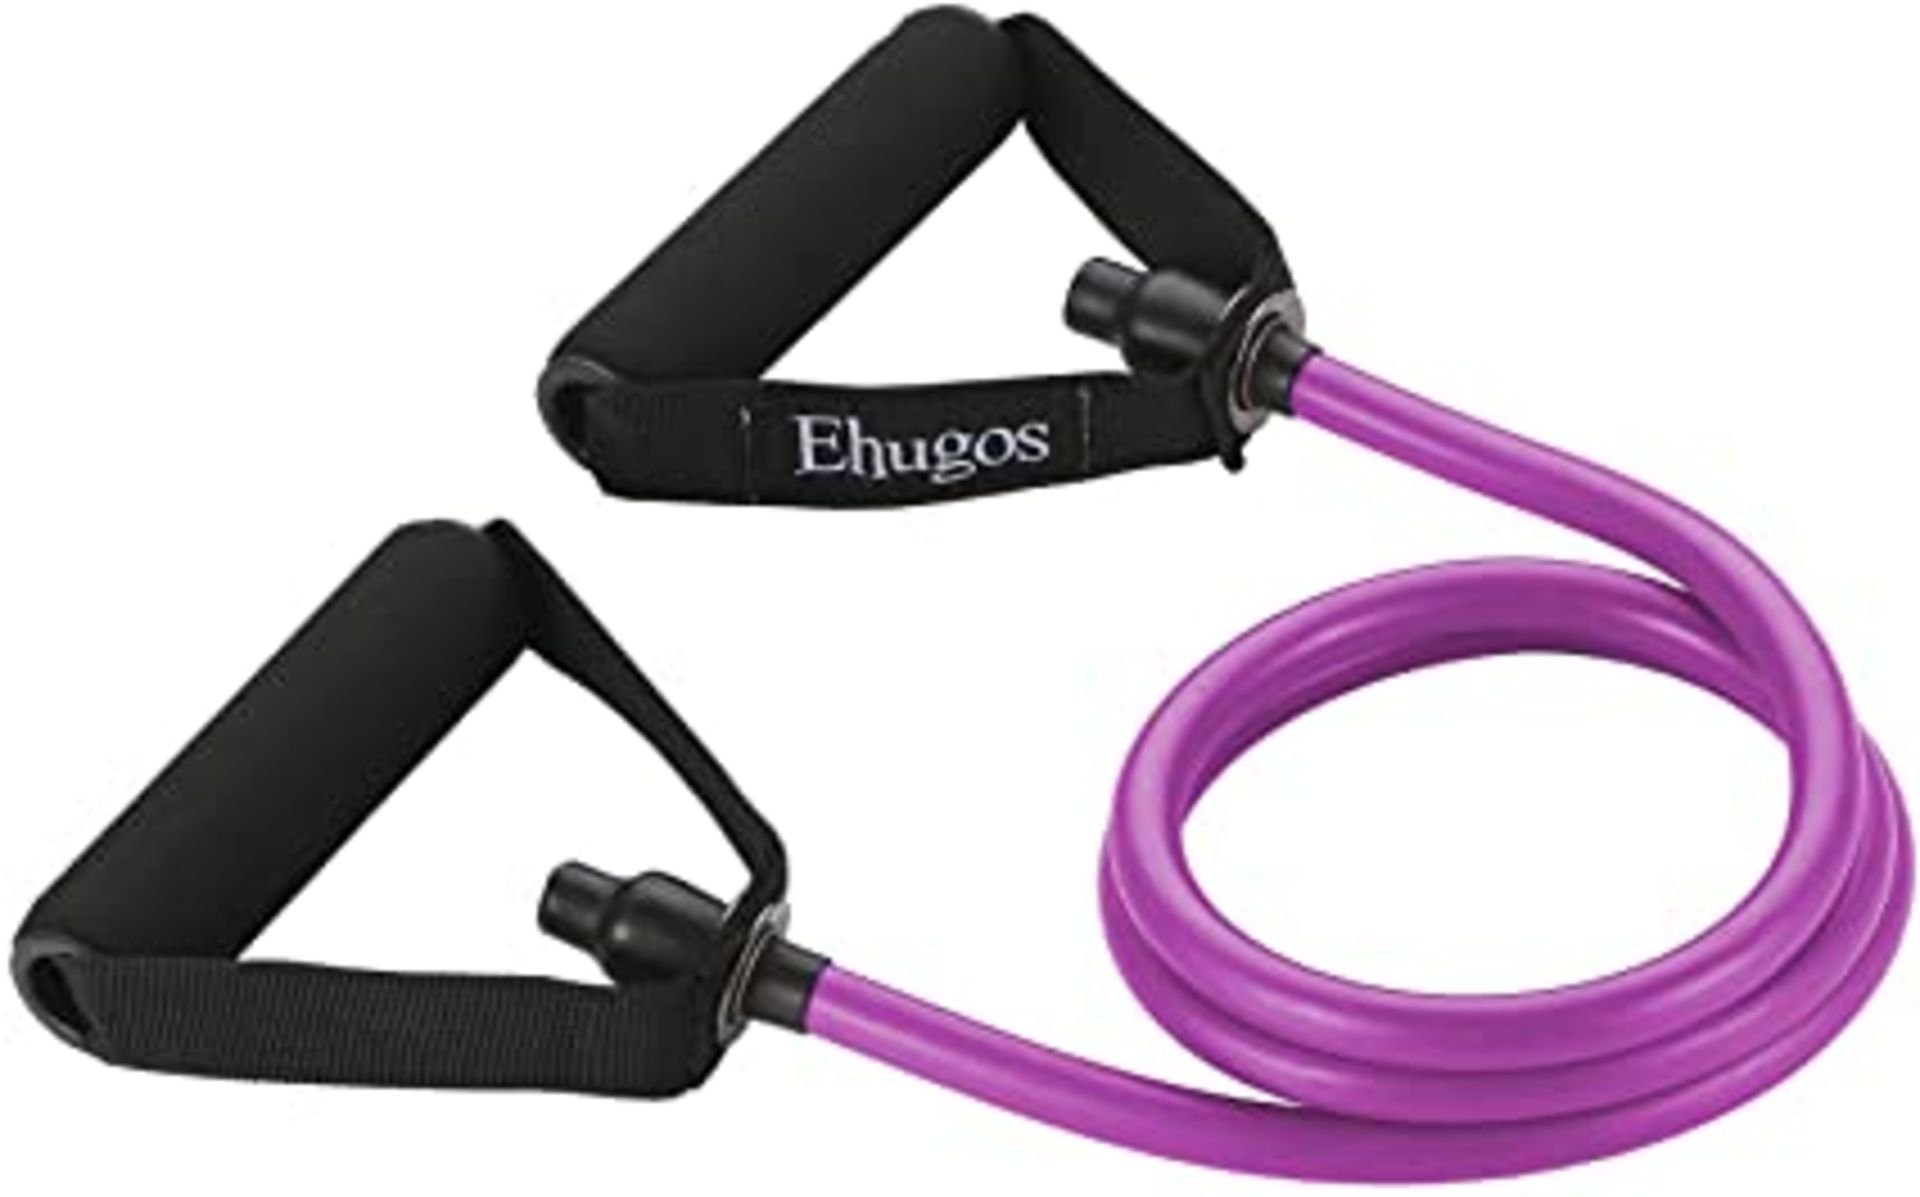 ehugos resistance band resistance training band work out exercise home gym new